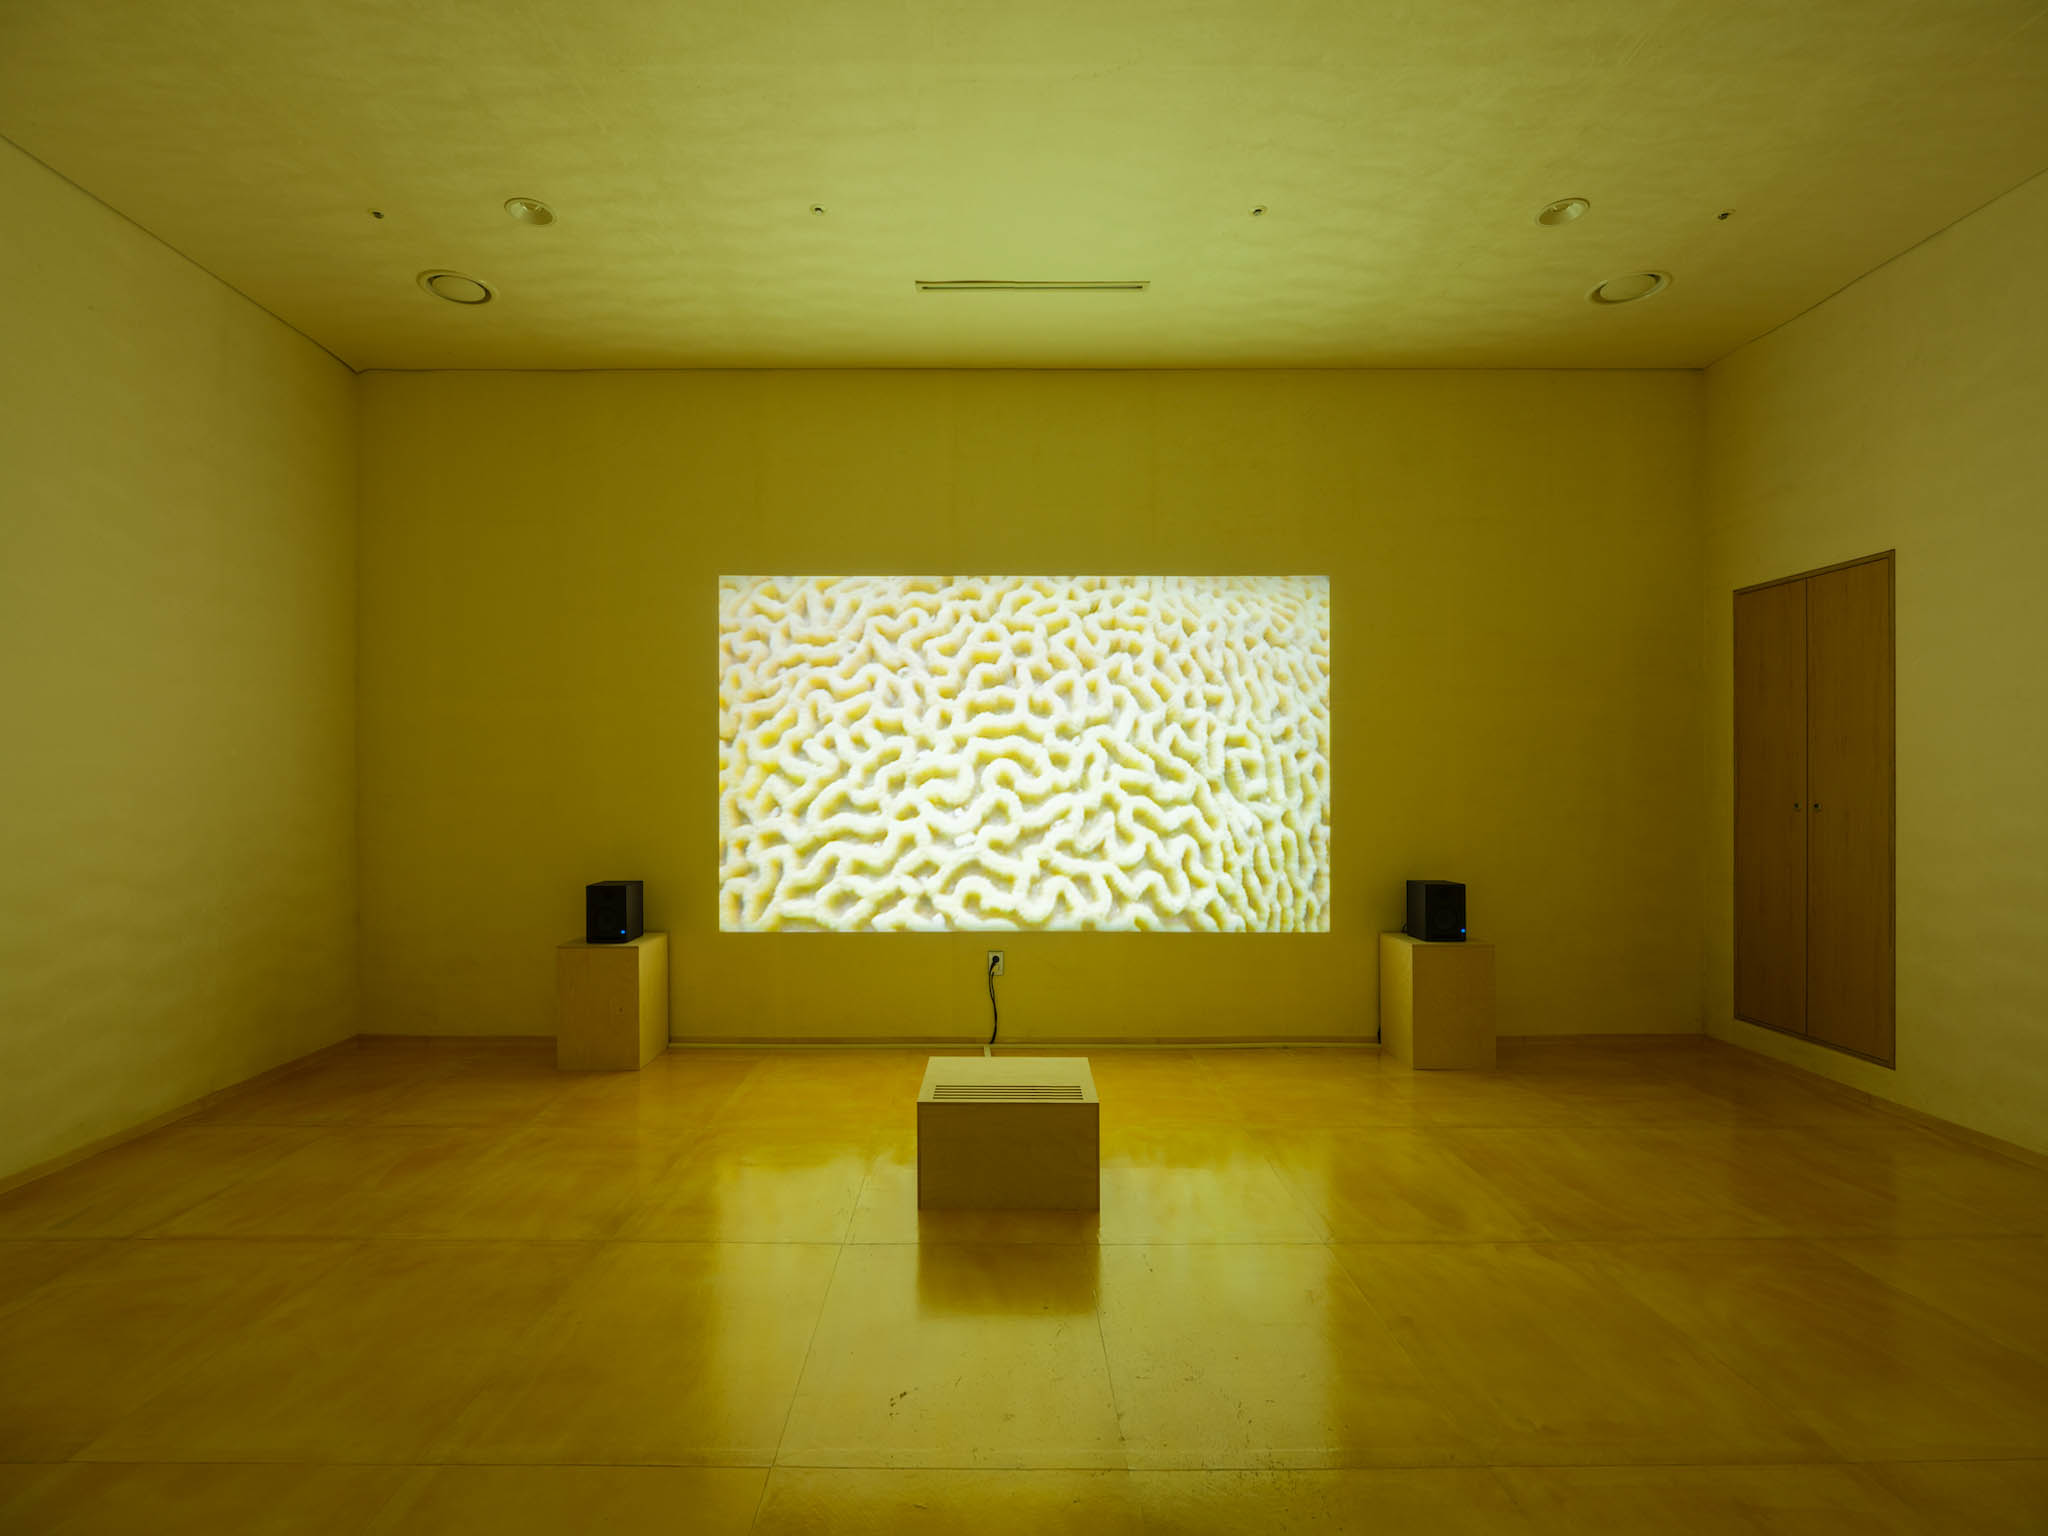 An empty gallery space with an abstract video of a coral's surface projected on the wall.